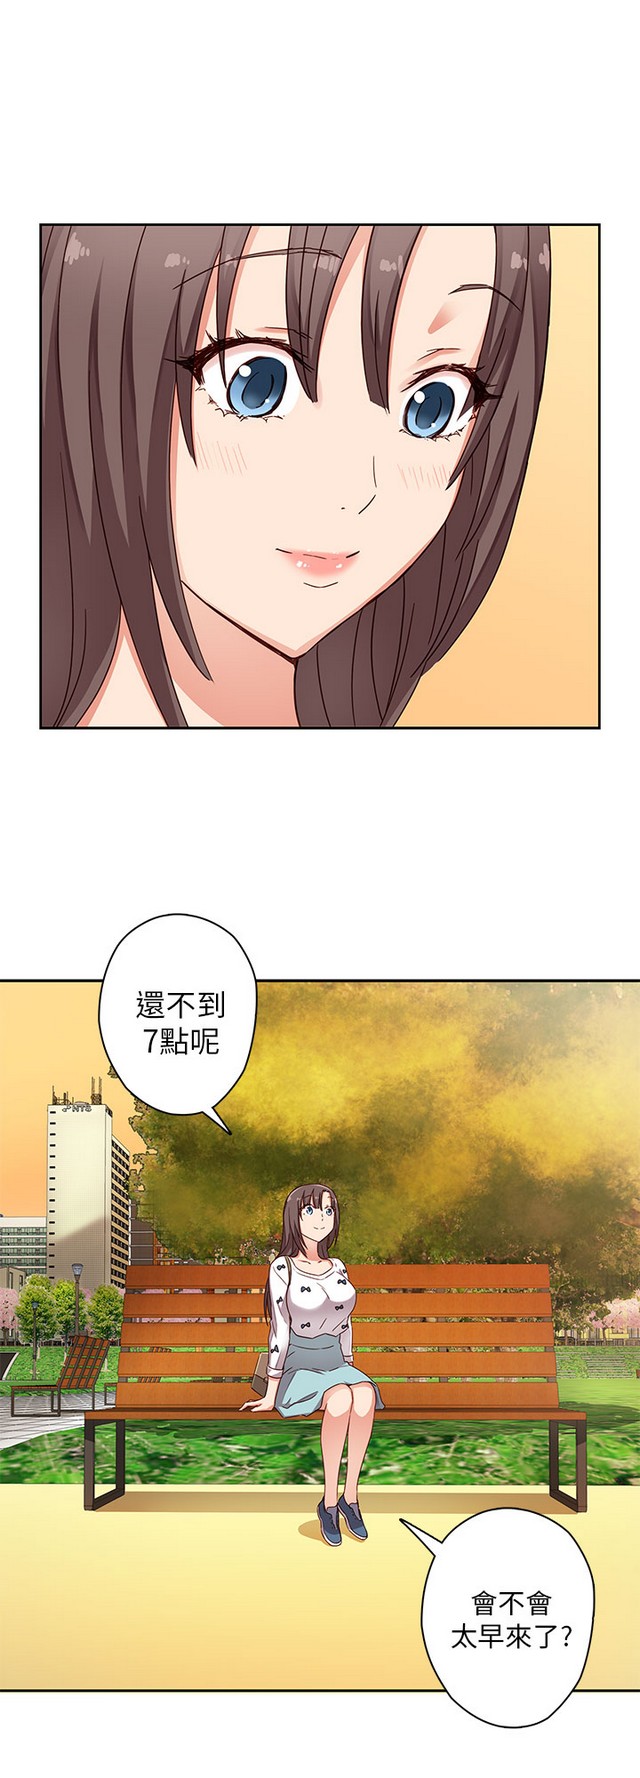 H校园 第一季 ch.10-18 [chinese] page 40 full